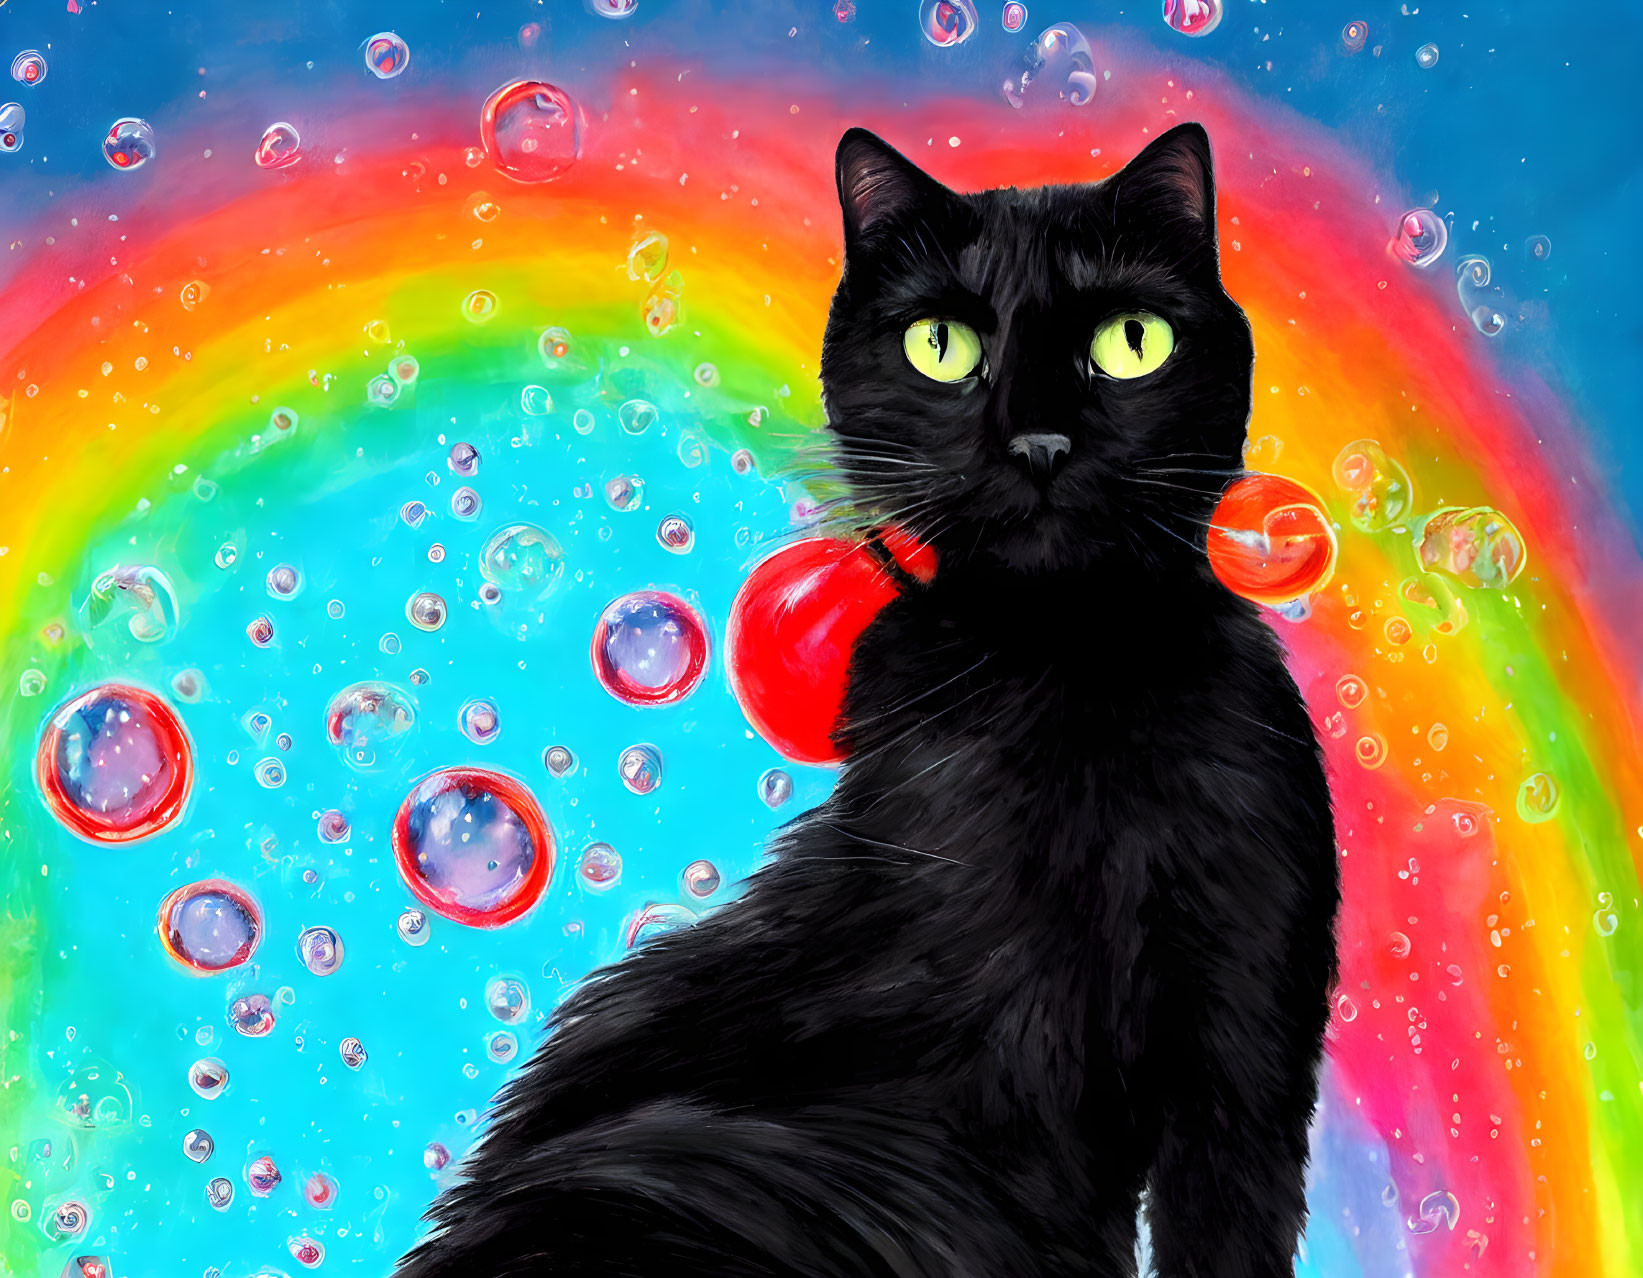 Black cat with green eyes in front of vibrant rainbow and bubbles